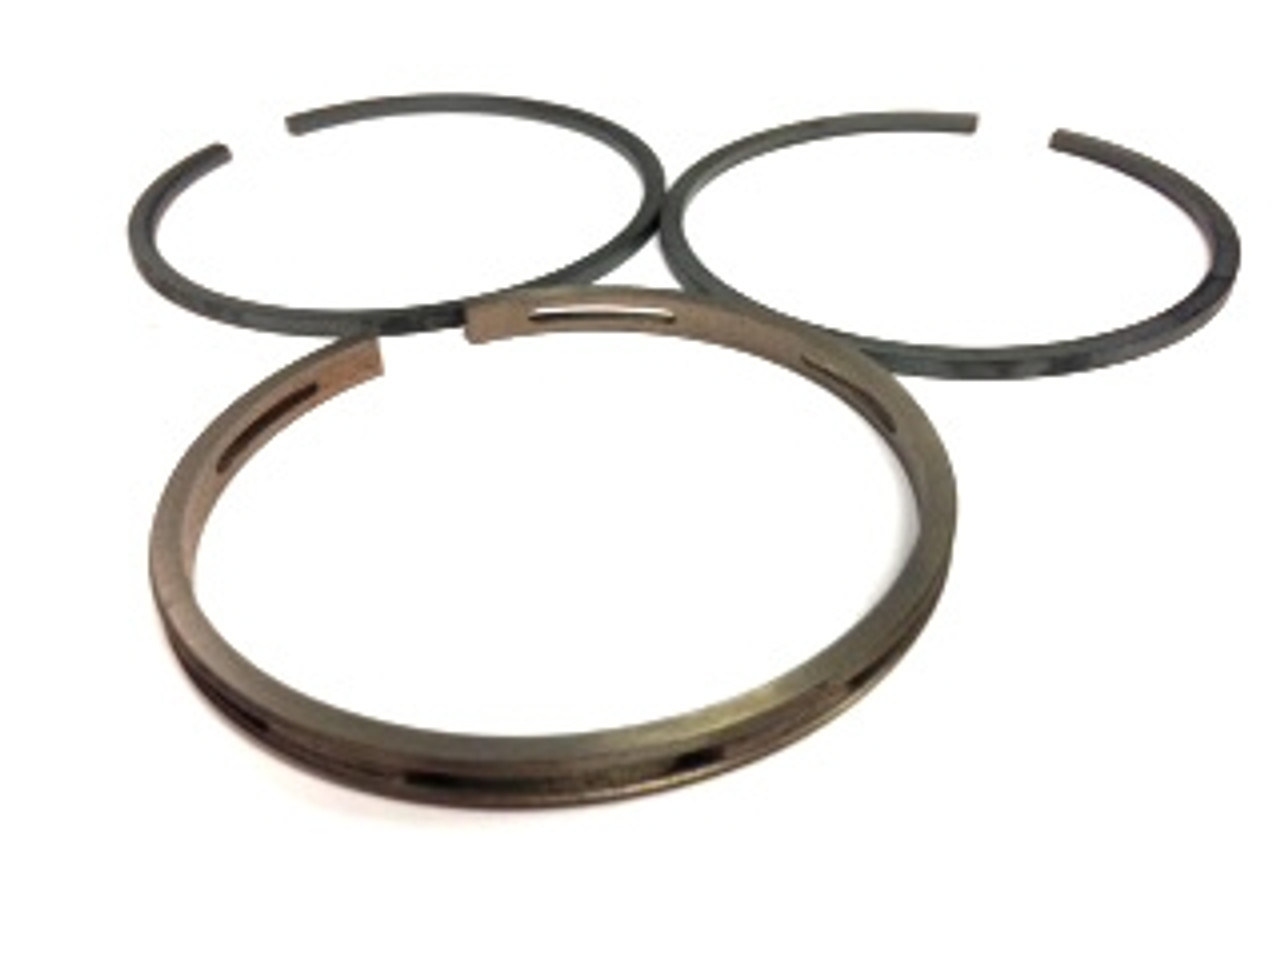 New Briggs And Stratton OEM Ring Set Part Number 791787